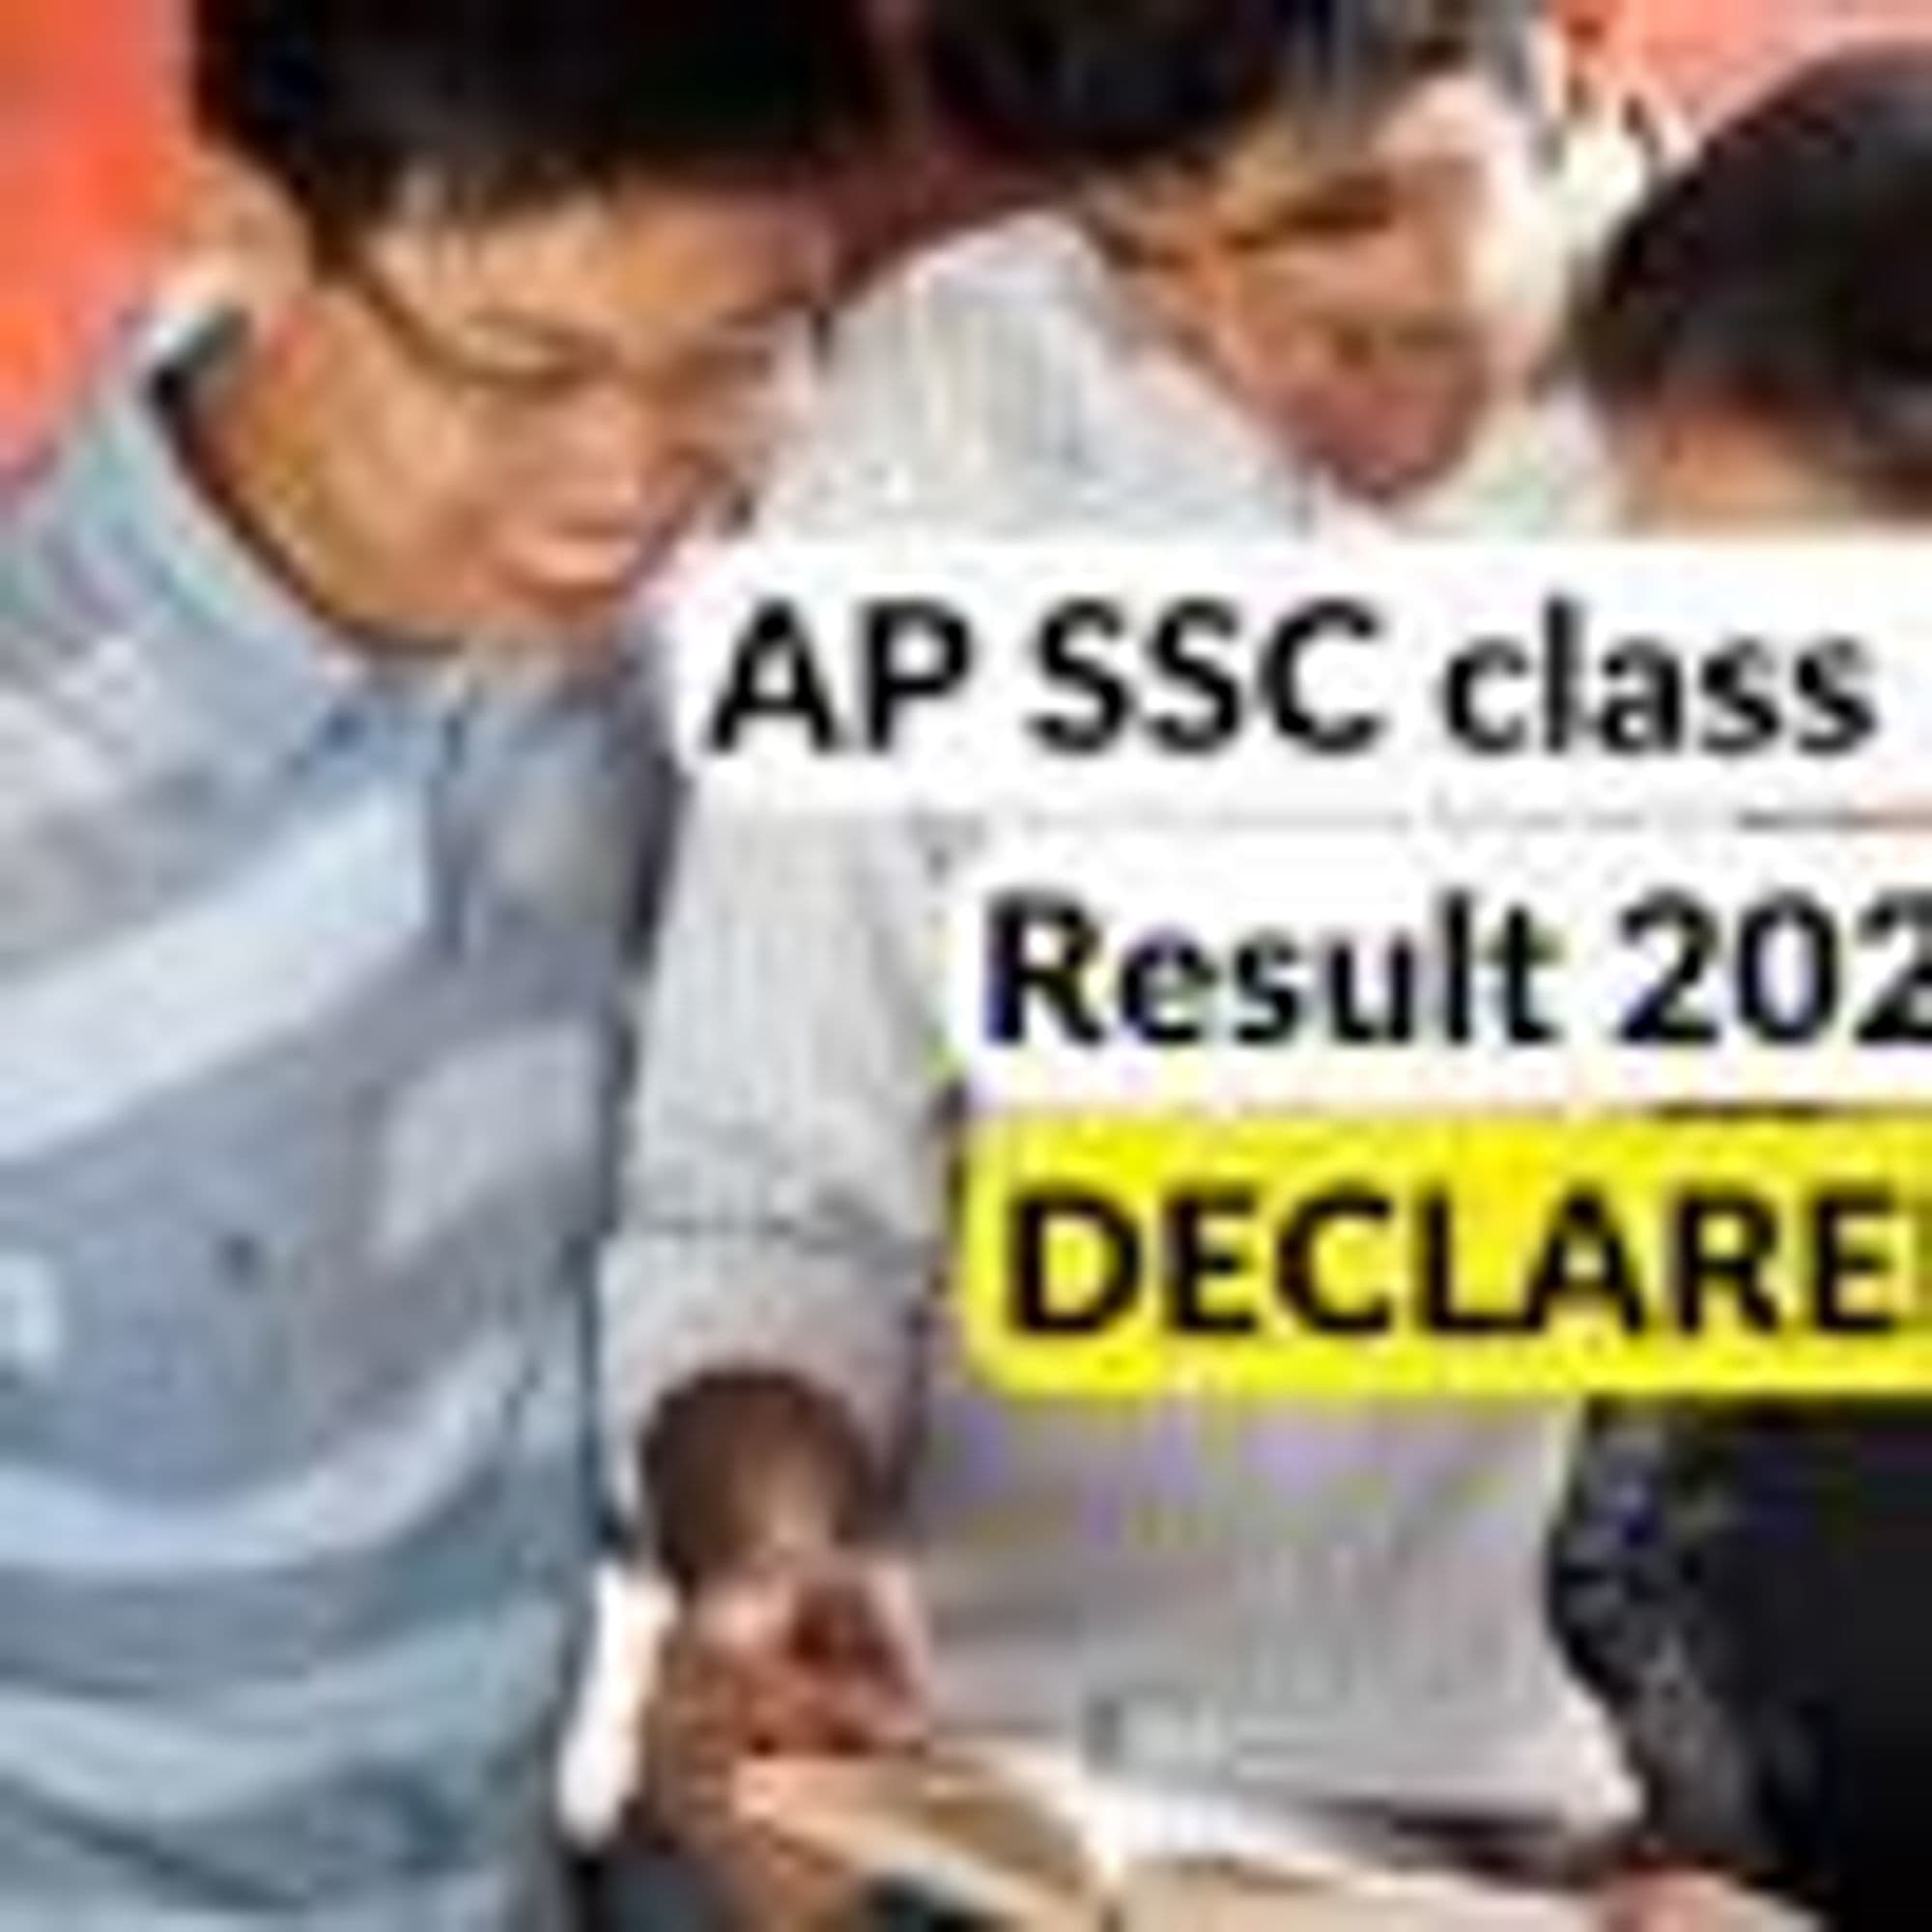 # The AP SSC 10th Result 2024: A Comprehensive Overview